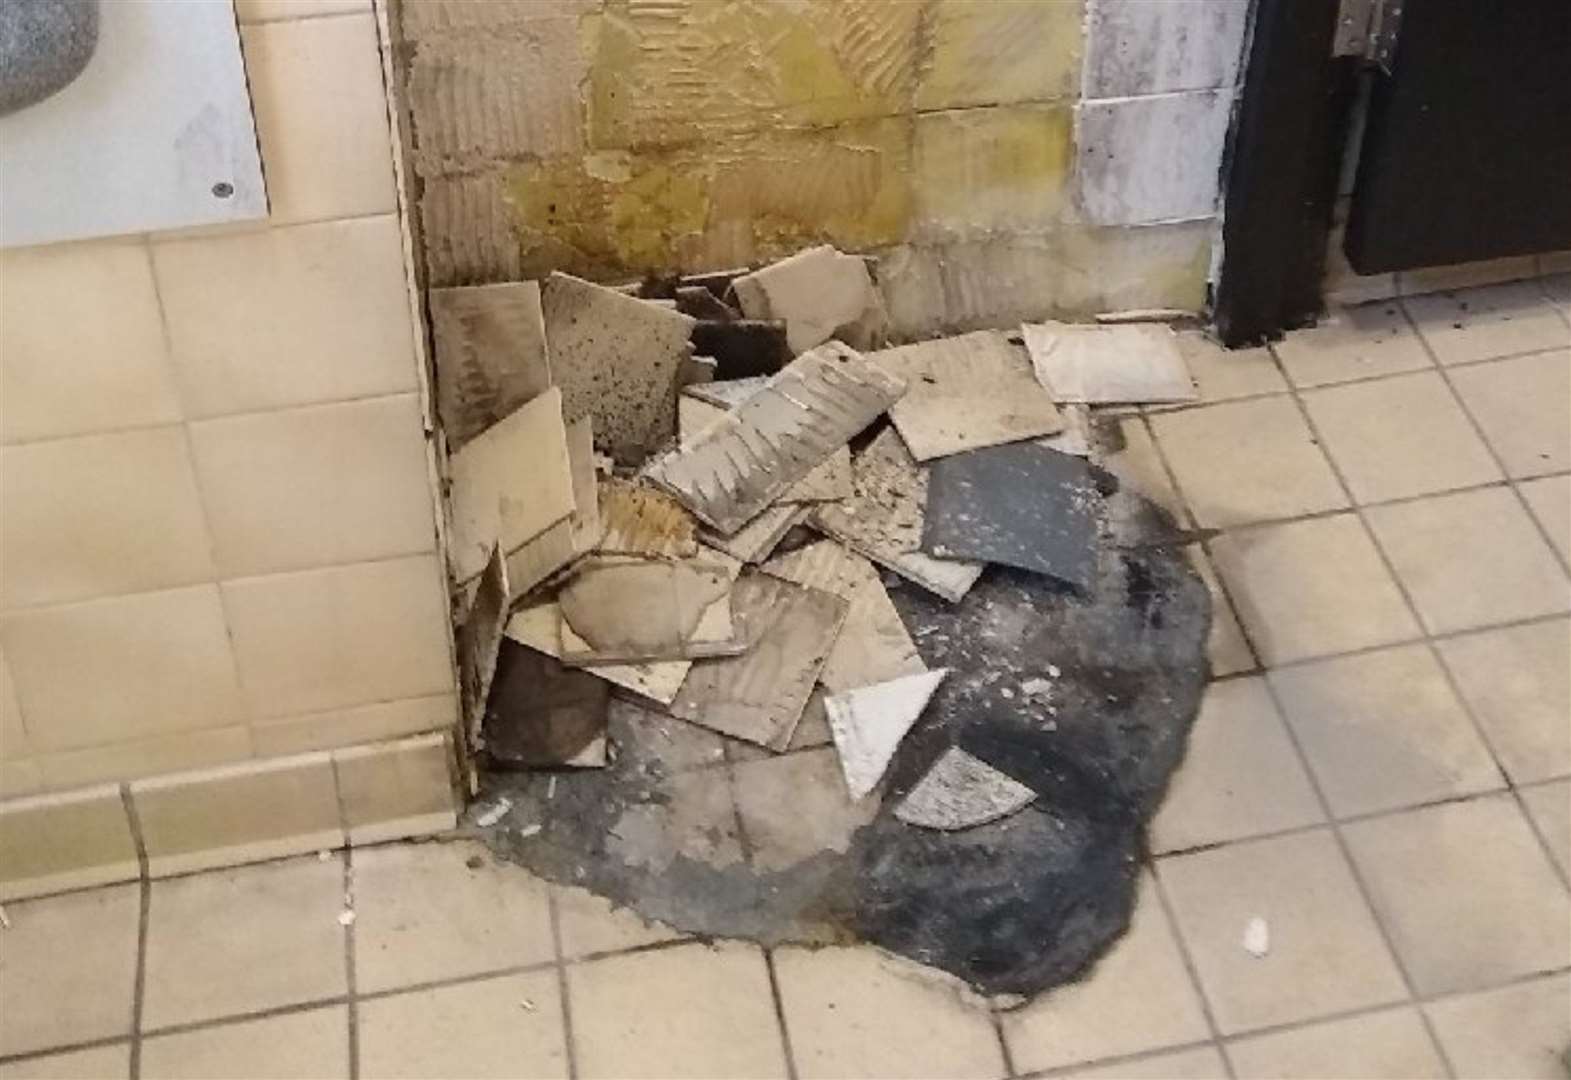 Toilets hit by second arson attack